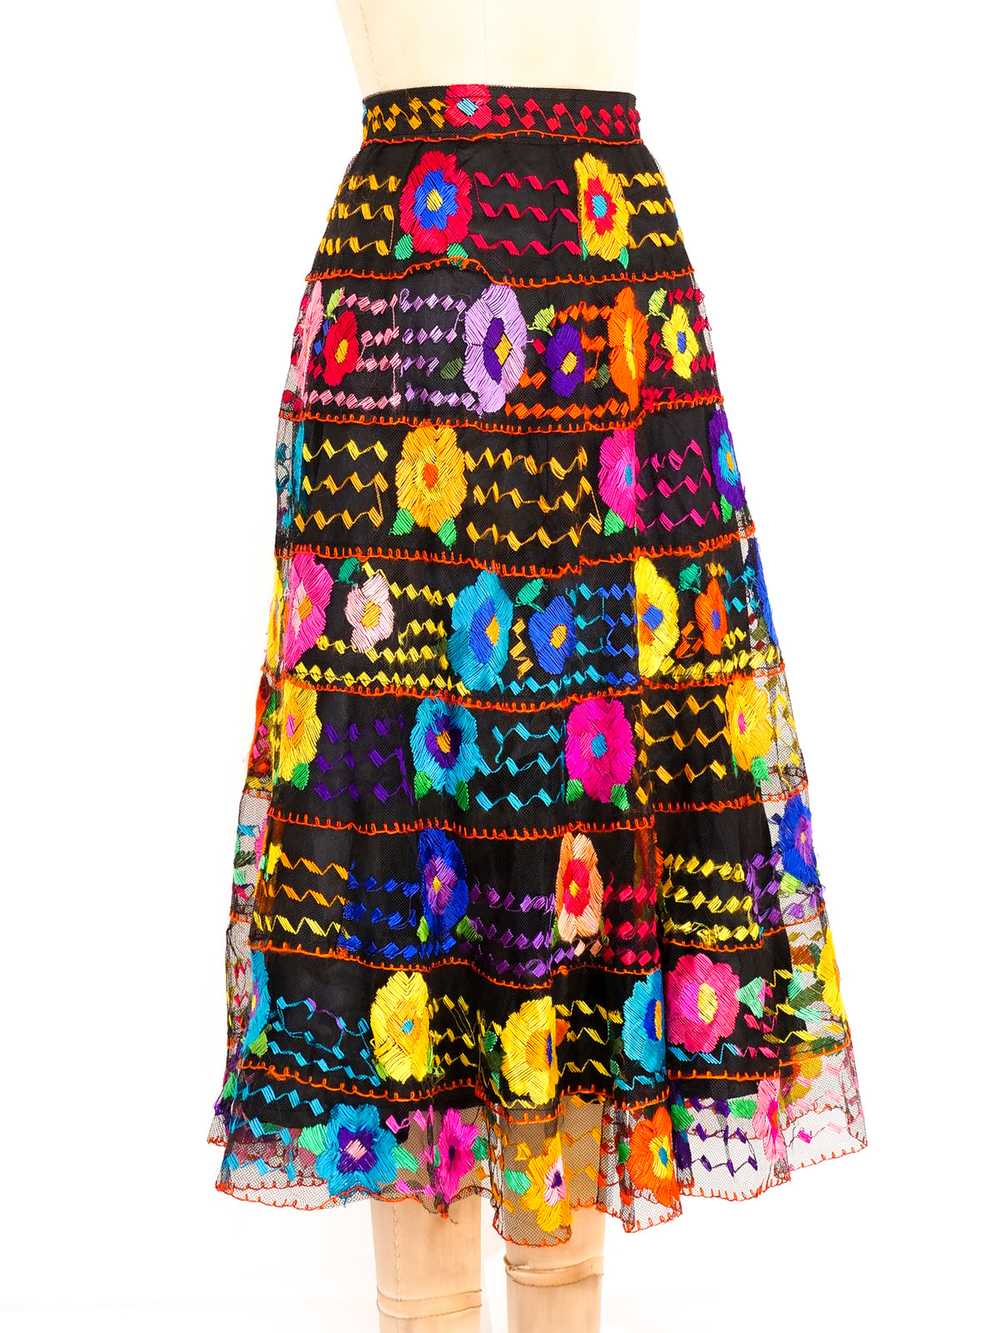 Floral Embroidered Mexican Midi Skirt - image 3